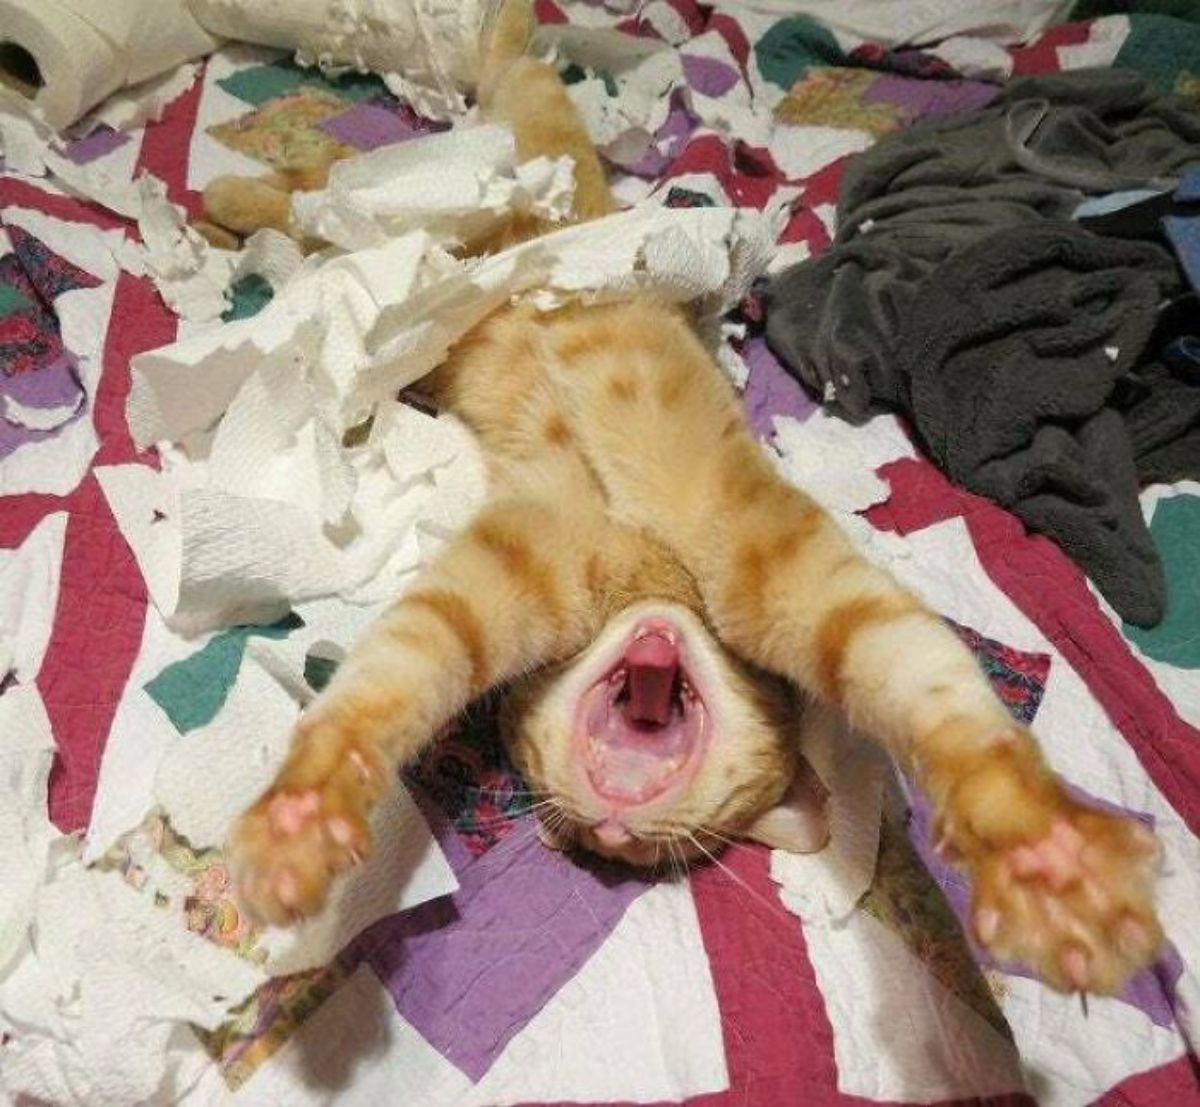 orange cat laying belly up and yawning amid a pile of ripped up toilet paper